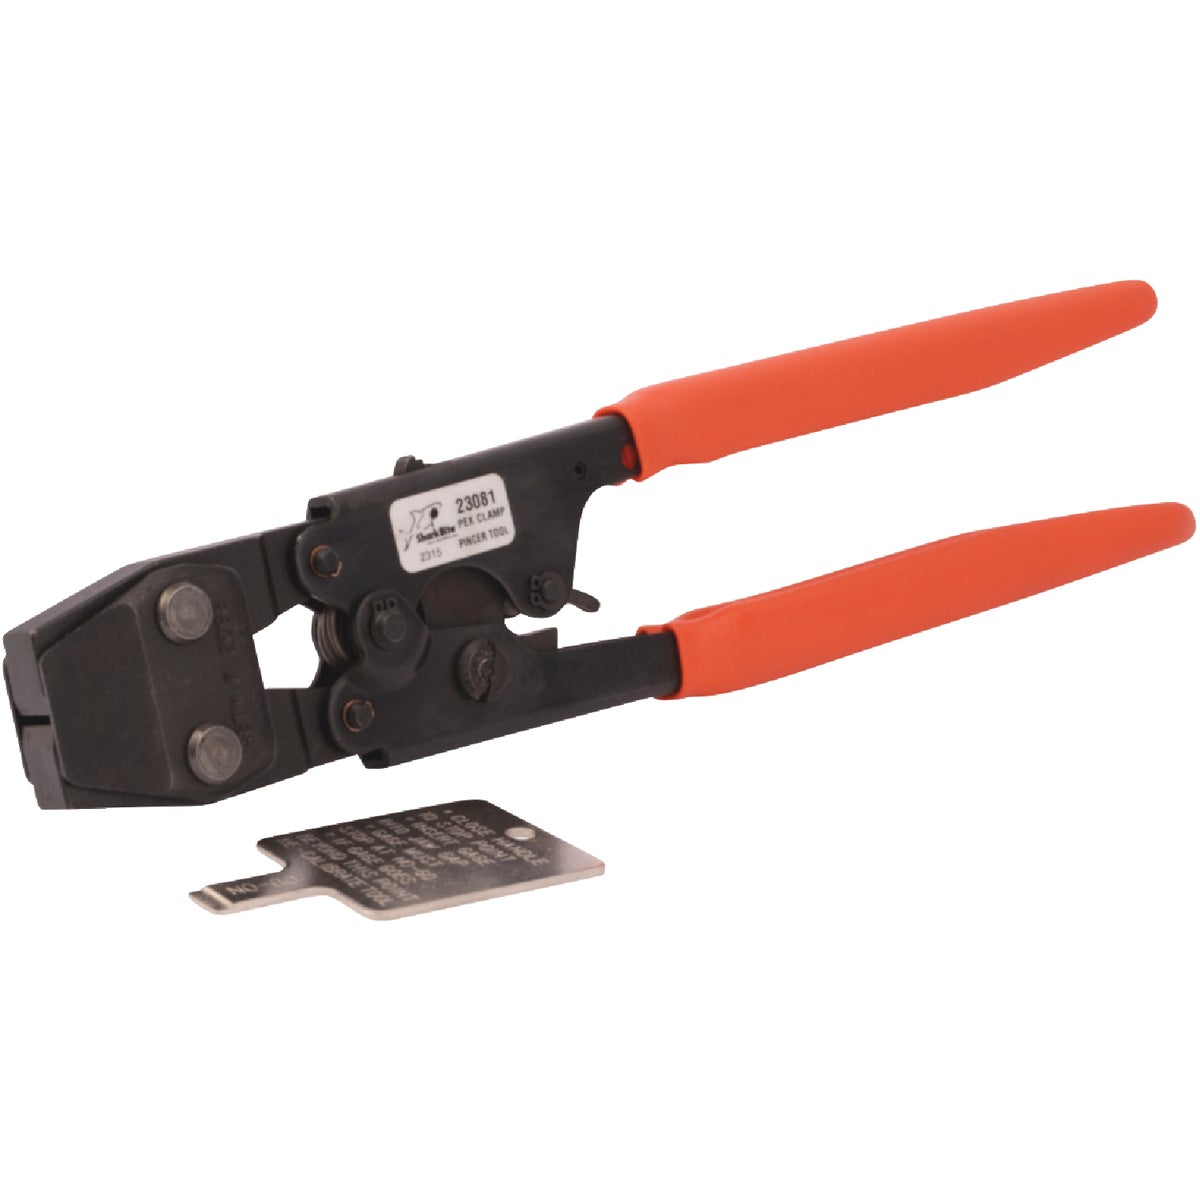 SharkBite 3/8 In. to 1 In. PEX Cinch Clamp Tool